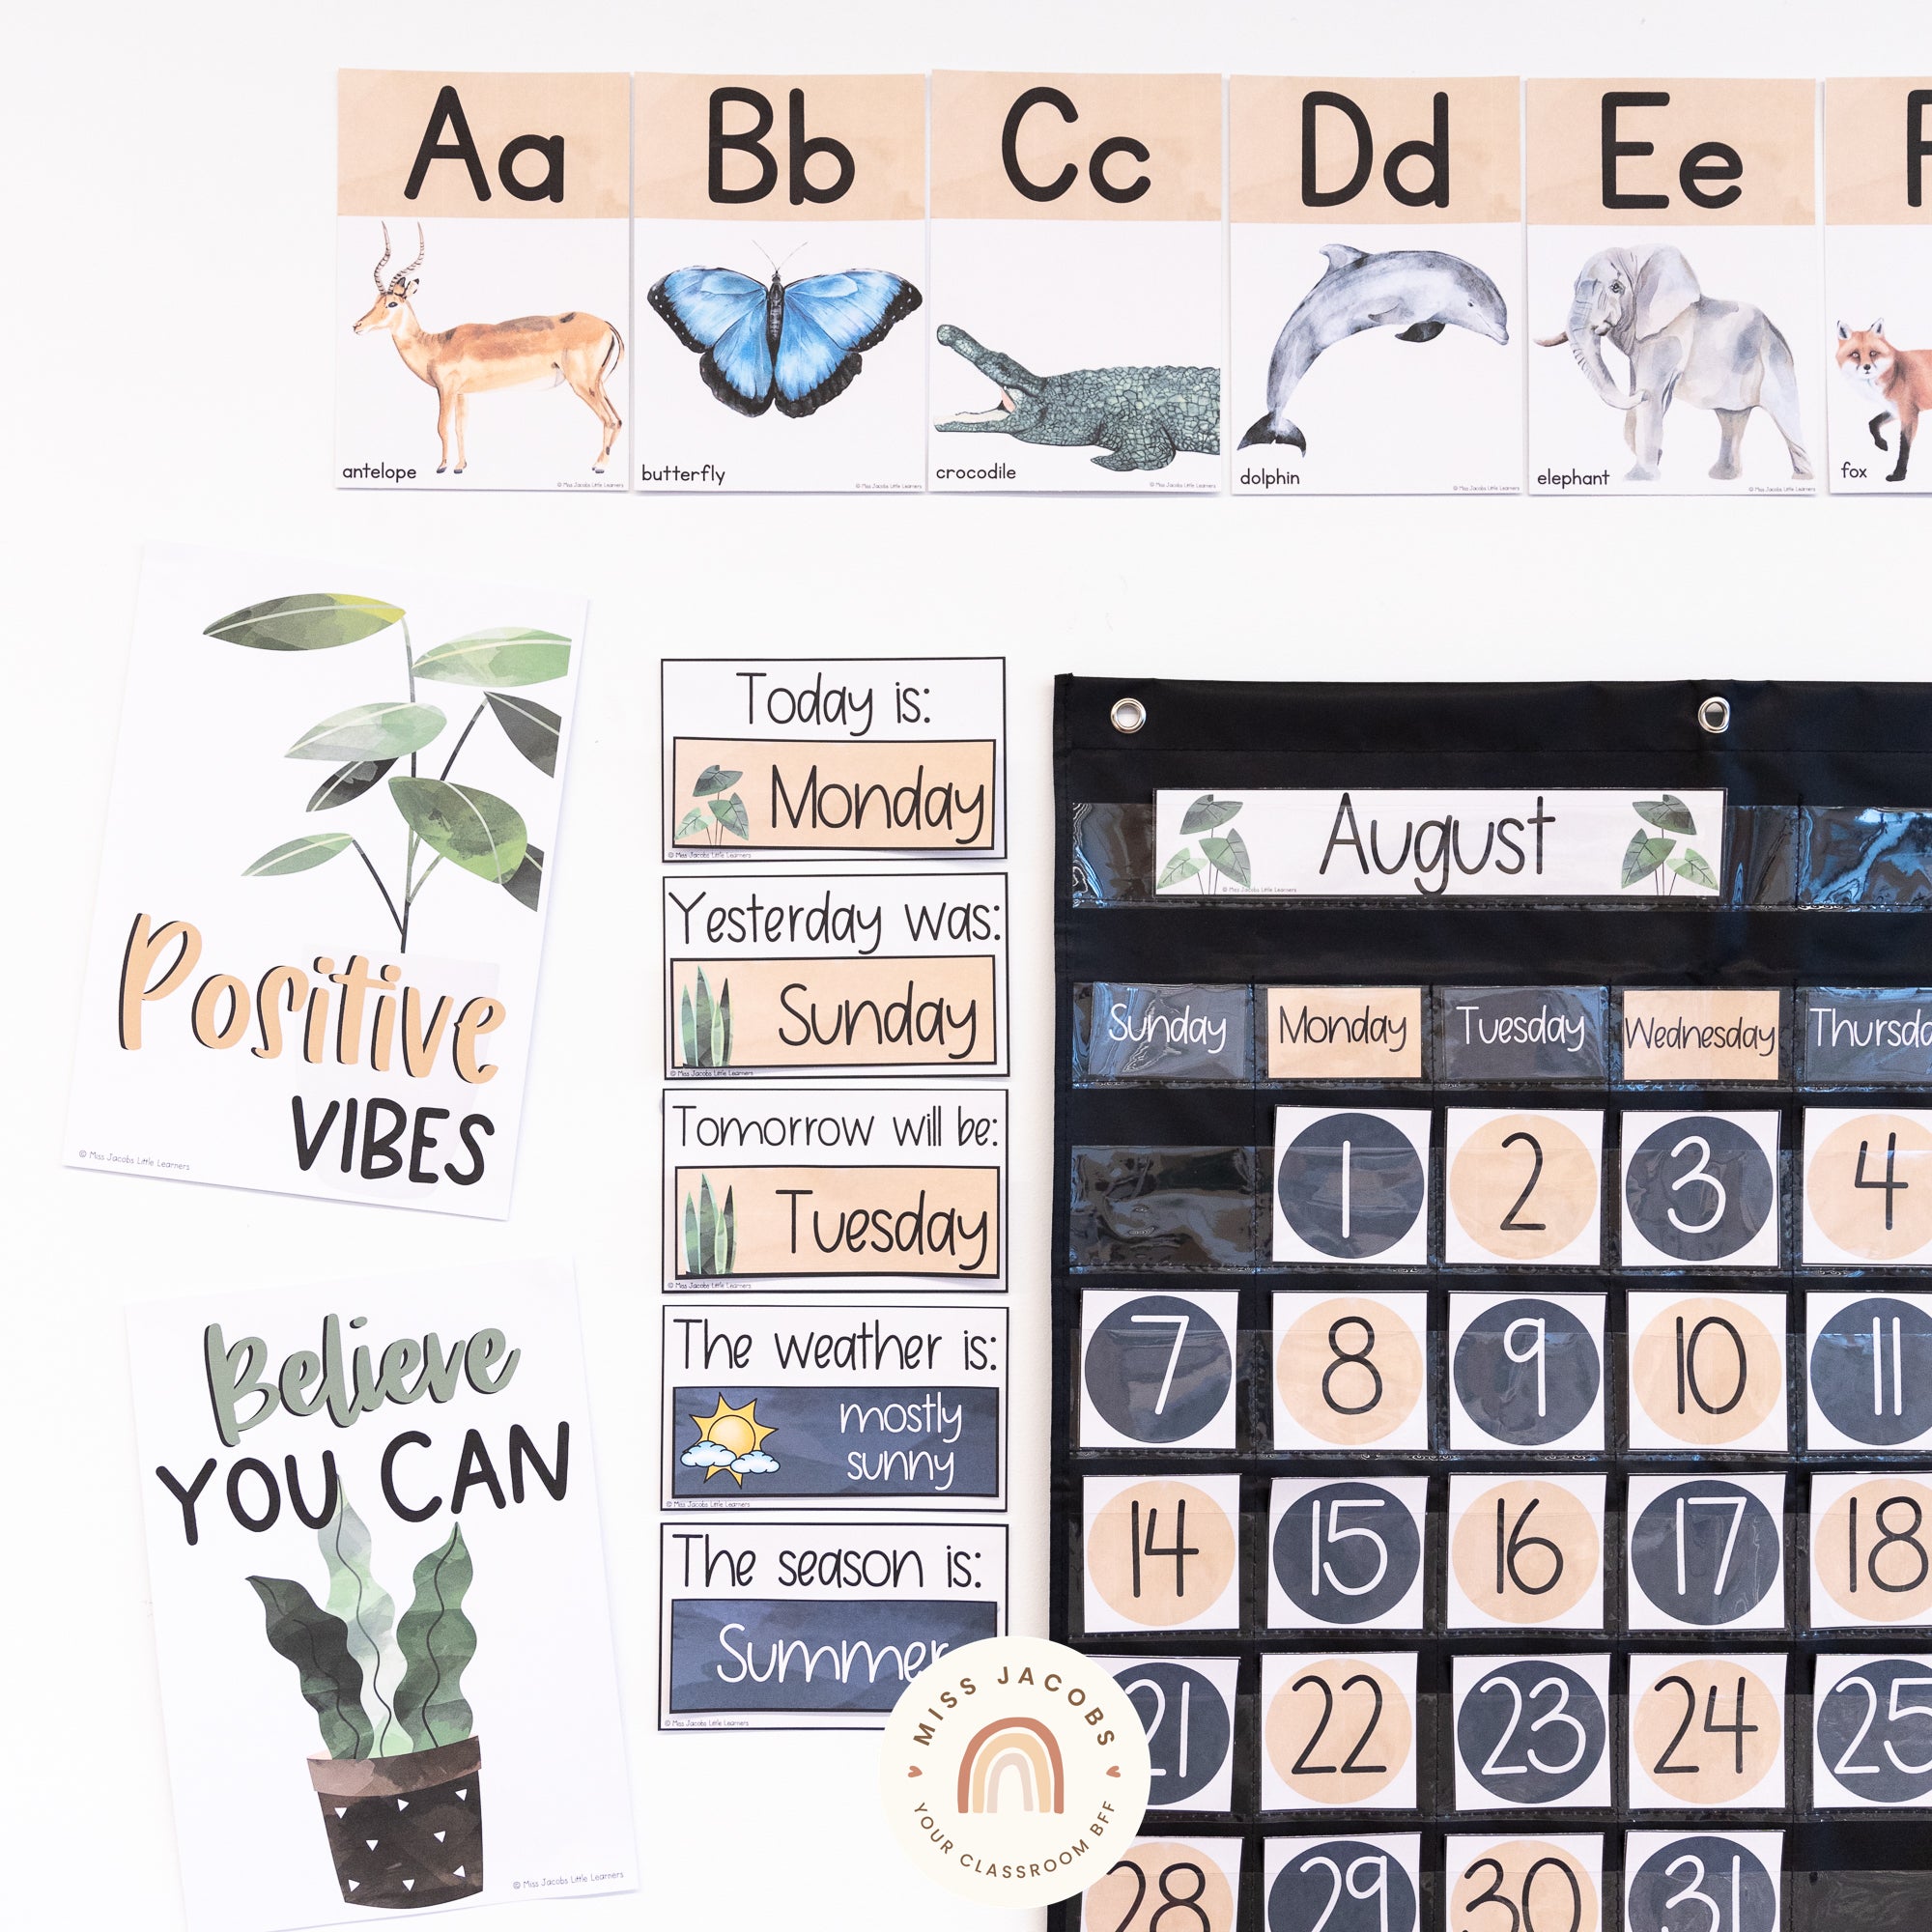 Two images show a closeup of a range of calendar displays in the Boho Plants theme. We see affirmation posters with phrases like ‘positive vibes’ and ‘believe you can’ as well as days of the week, numerals and alphabet posters. There’s a limited color palette featuring a soft peachy sand color, a dark gray and shades of green.